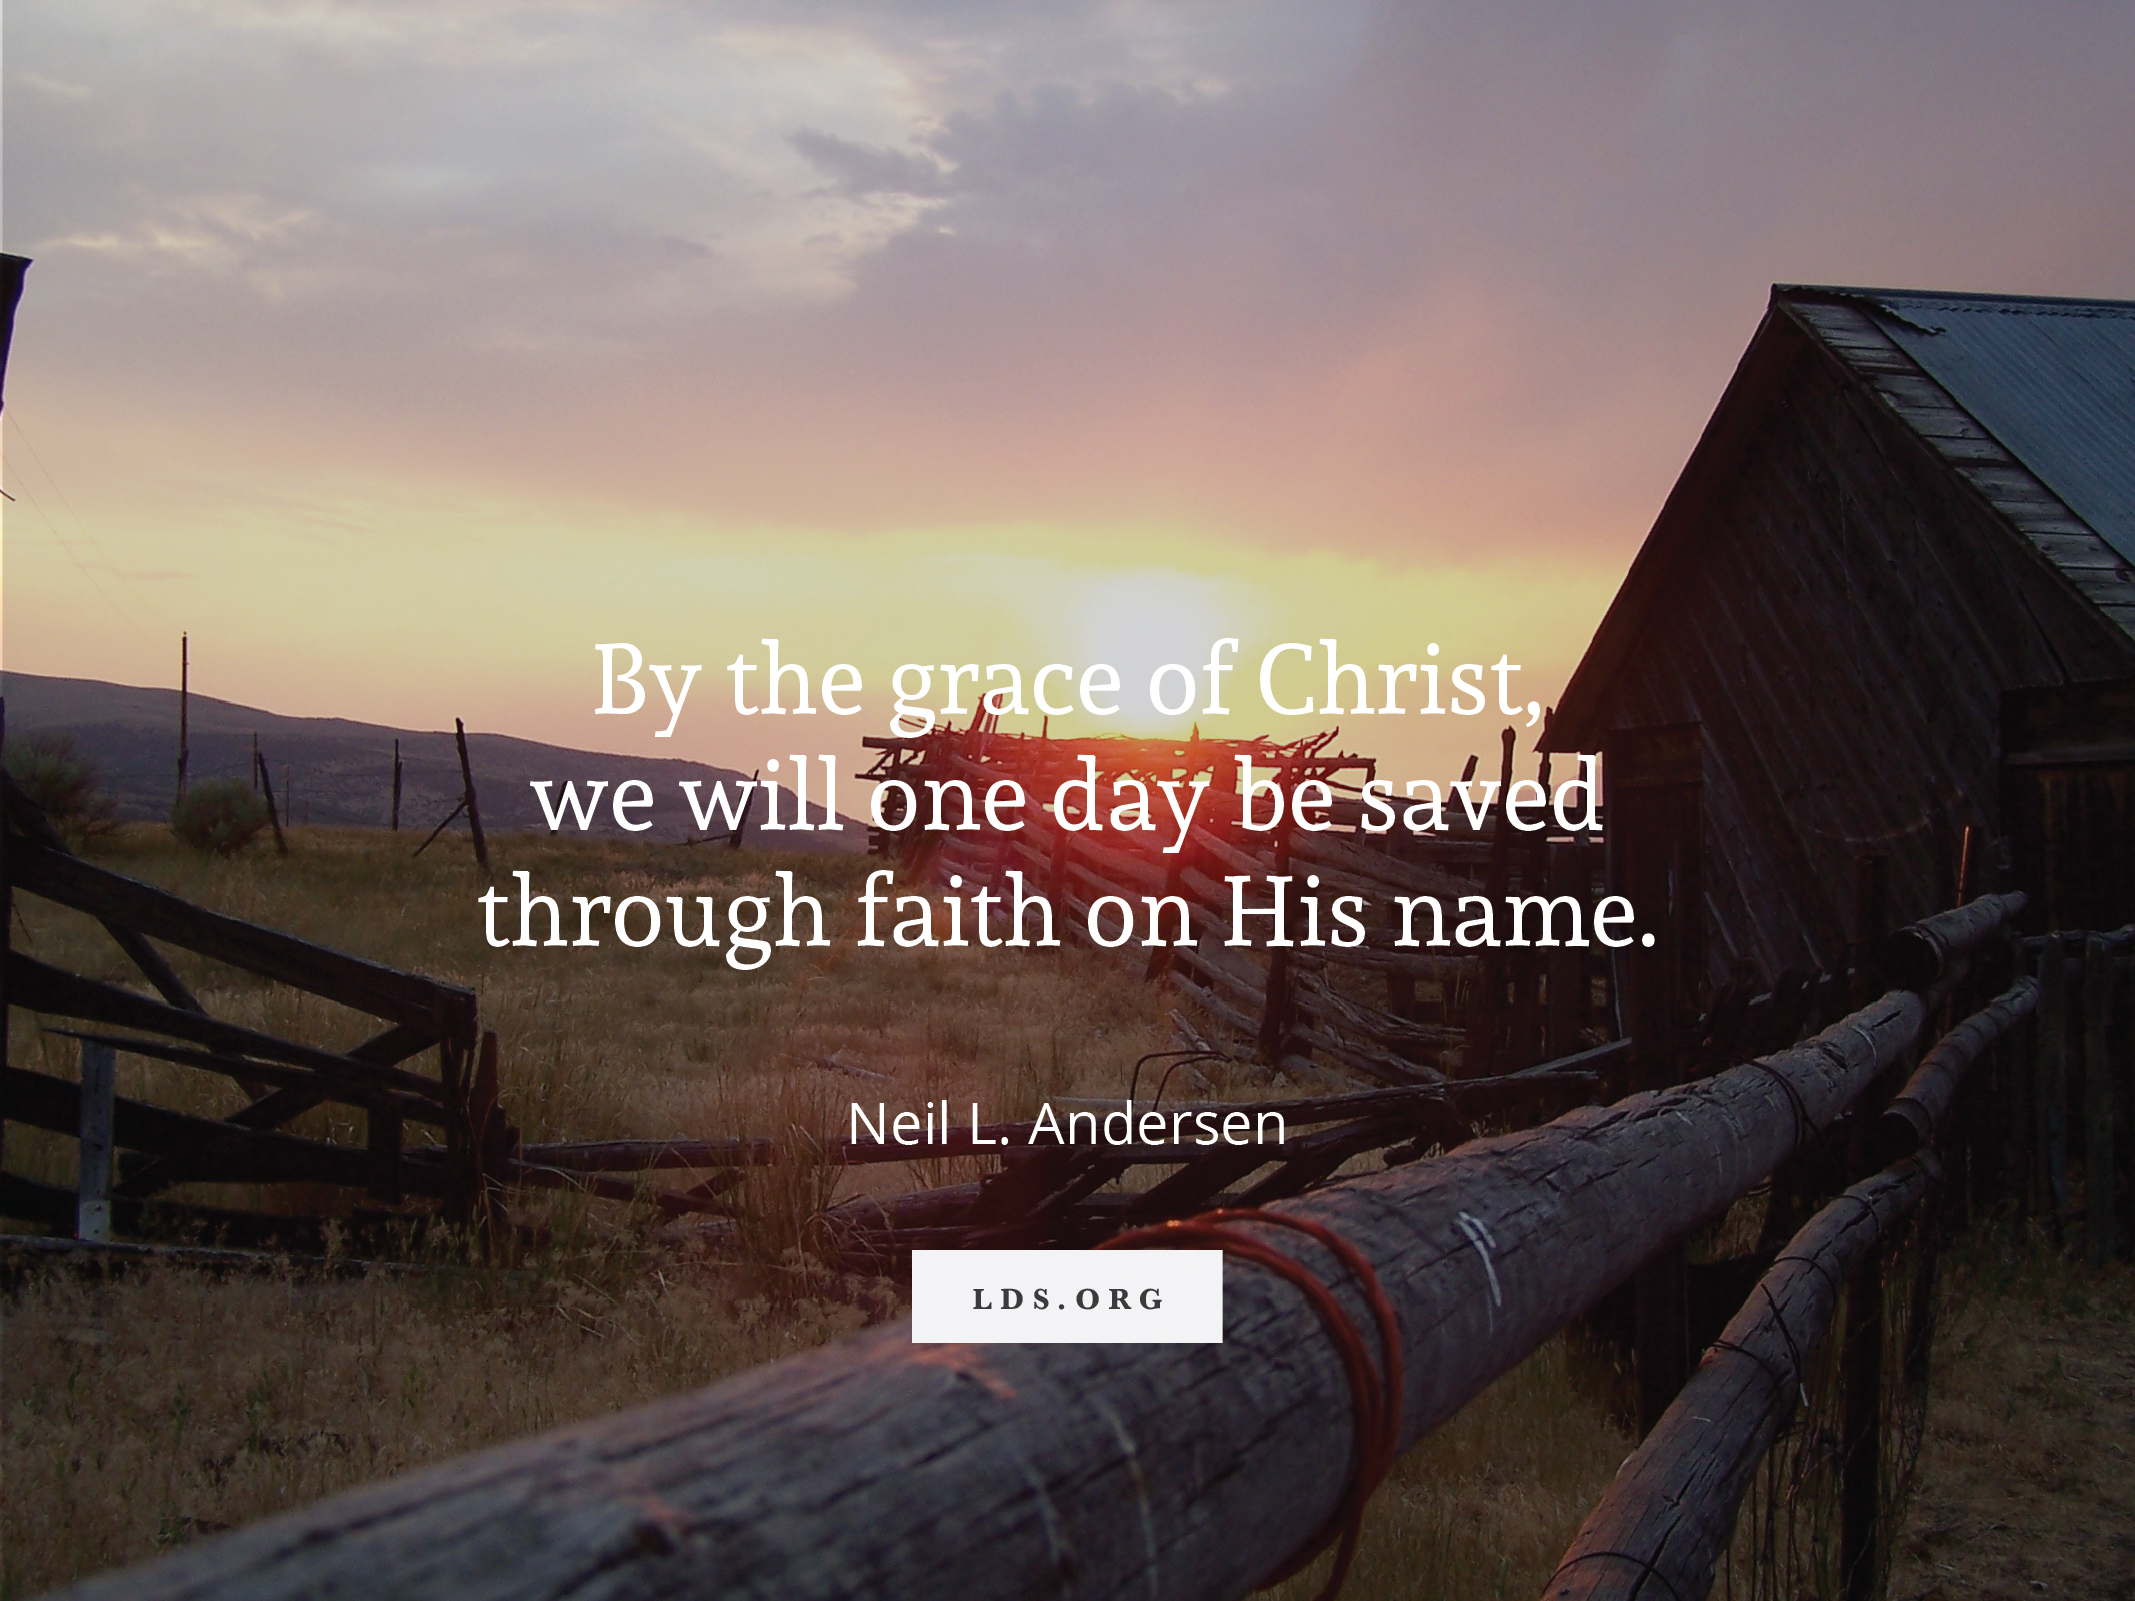 A photograph of a wooden barn and a fence at sunset, with a quote from Elder Neil L. Andersen: “By the grace of Christ, we will one day be saved.”